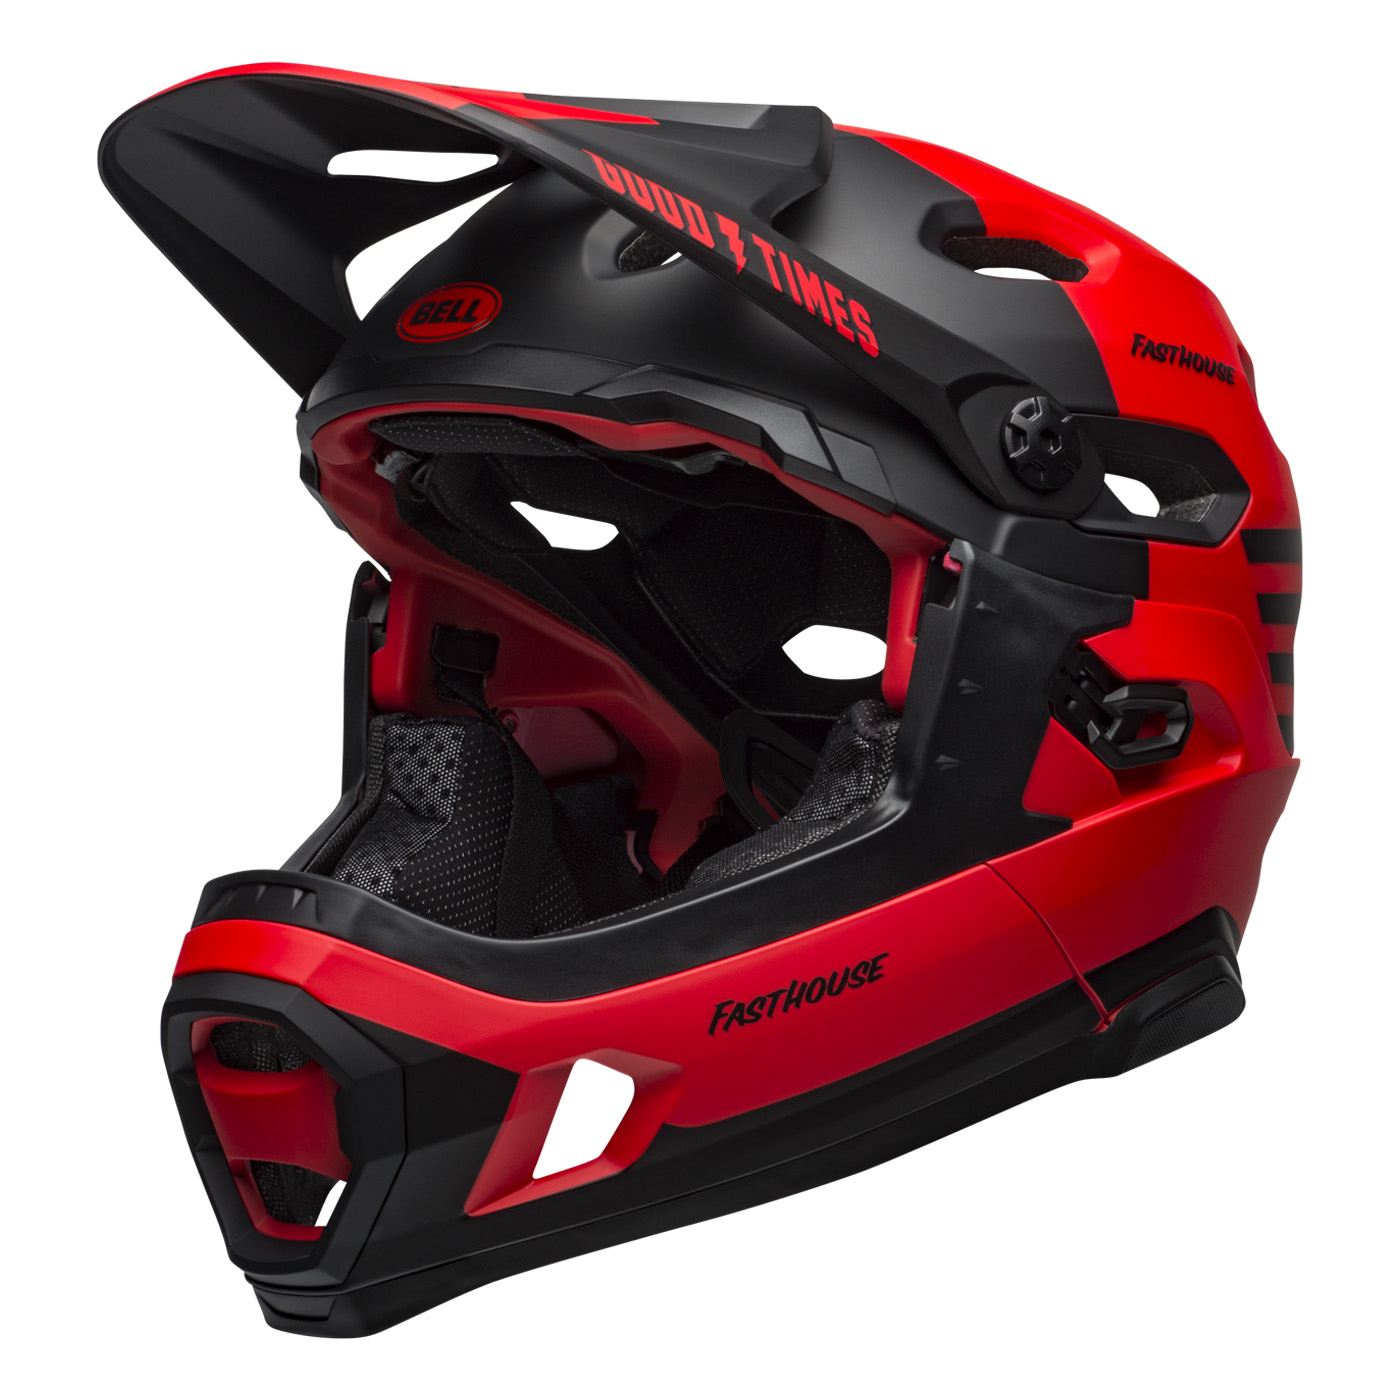 Casco BELL DownHill SUPER DH SPHERICAL Mips Fasthouse Rojo/Negro Talla:M (55-59cm) 7113175